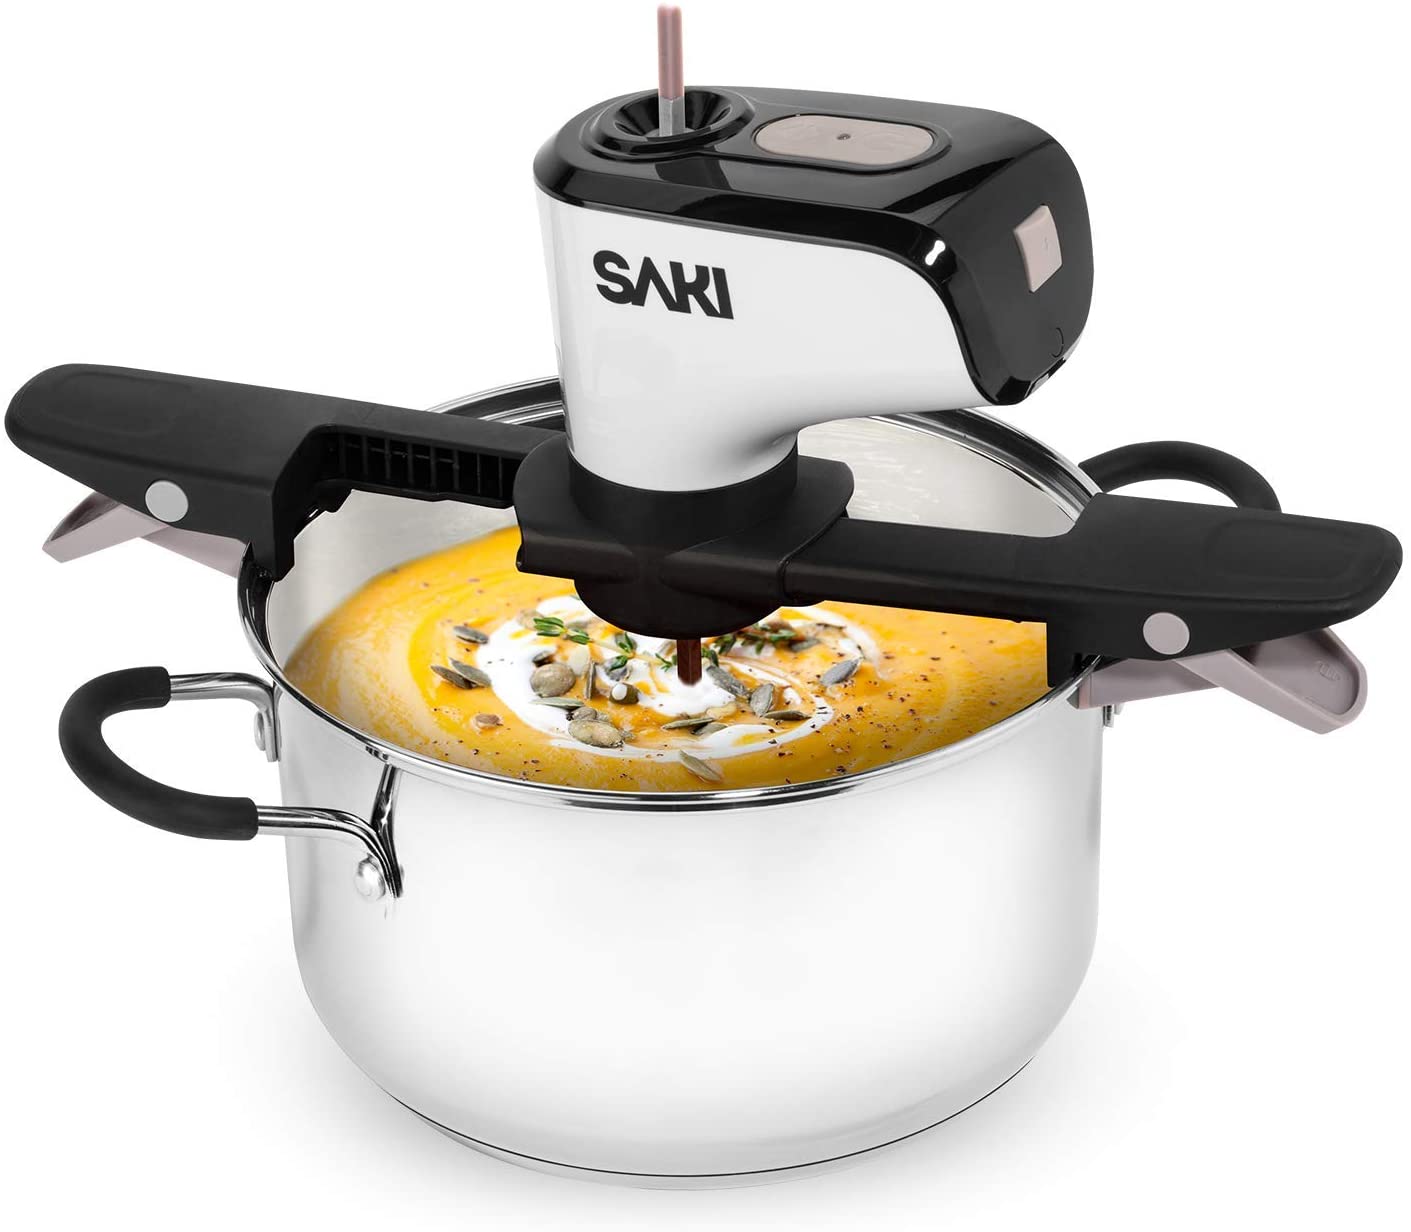 https://www.wideopencountry.com/wp-content/uploads/sites/4/eats/2021/06/SAKI-Automatic-Pot-Stirrer-for-Cooking-with-2-speeds-Adjustable-Hands-Free-BPA-free-Cordless-and-Rechargeable-2021-Updated-Battery-.jpg?resize=1411%2C1232